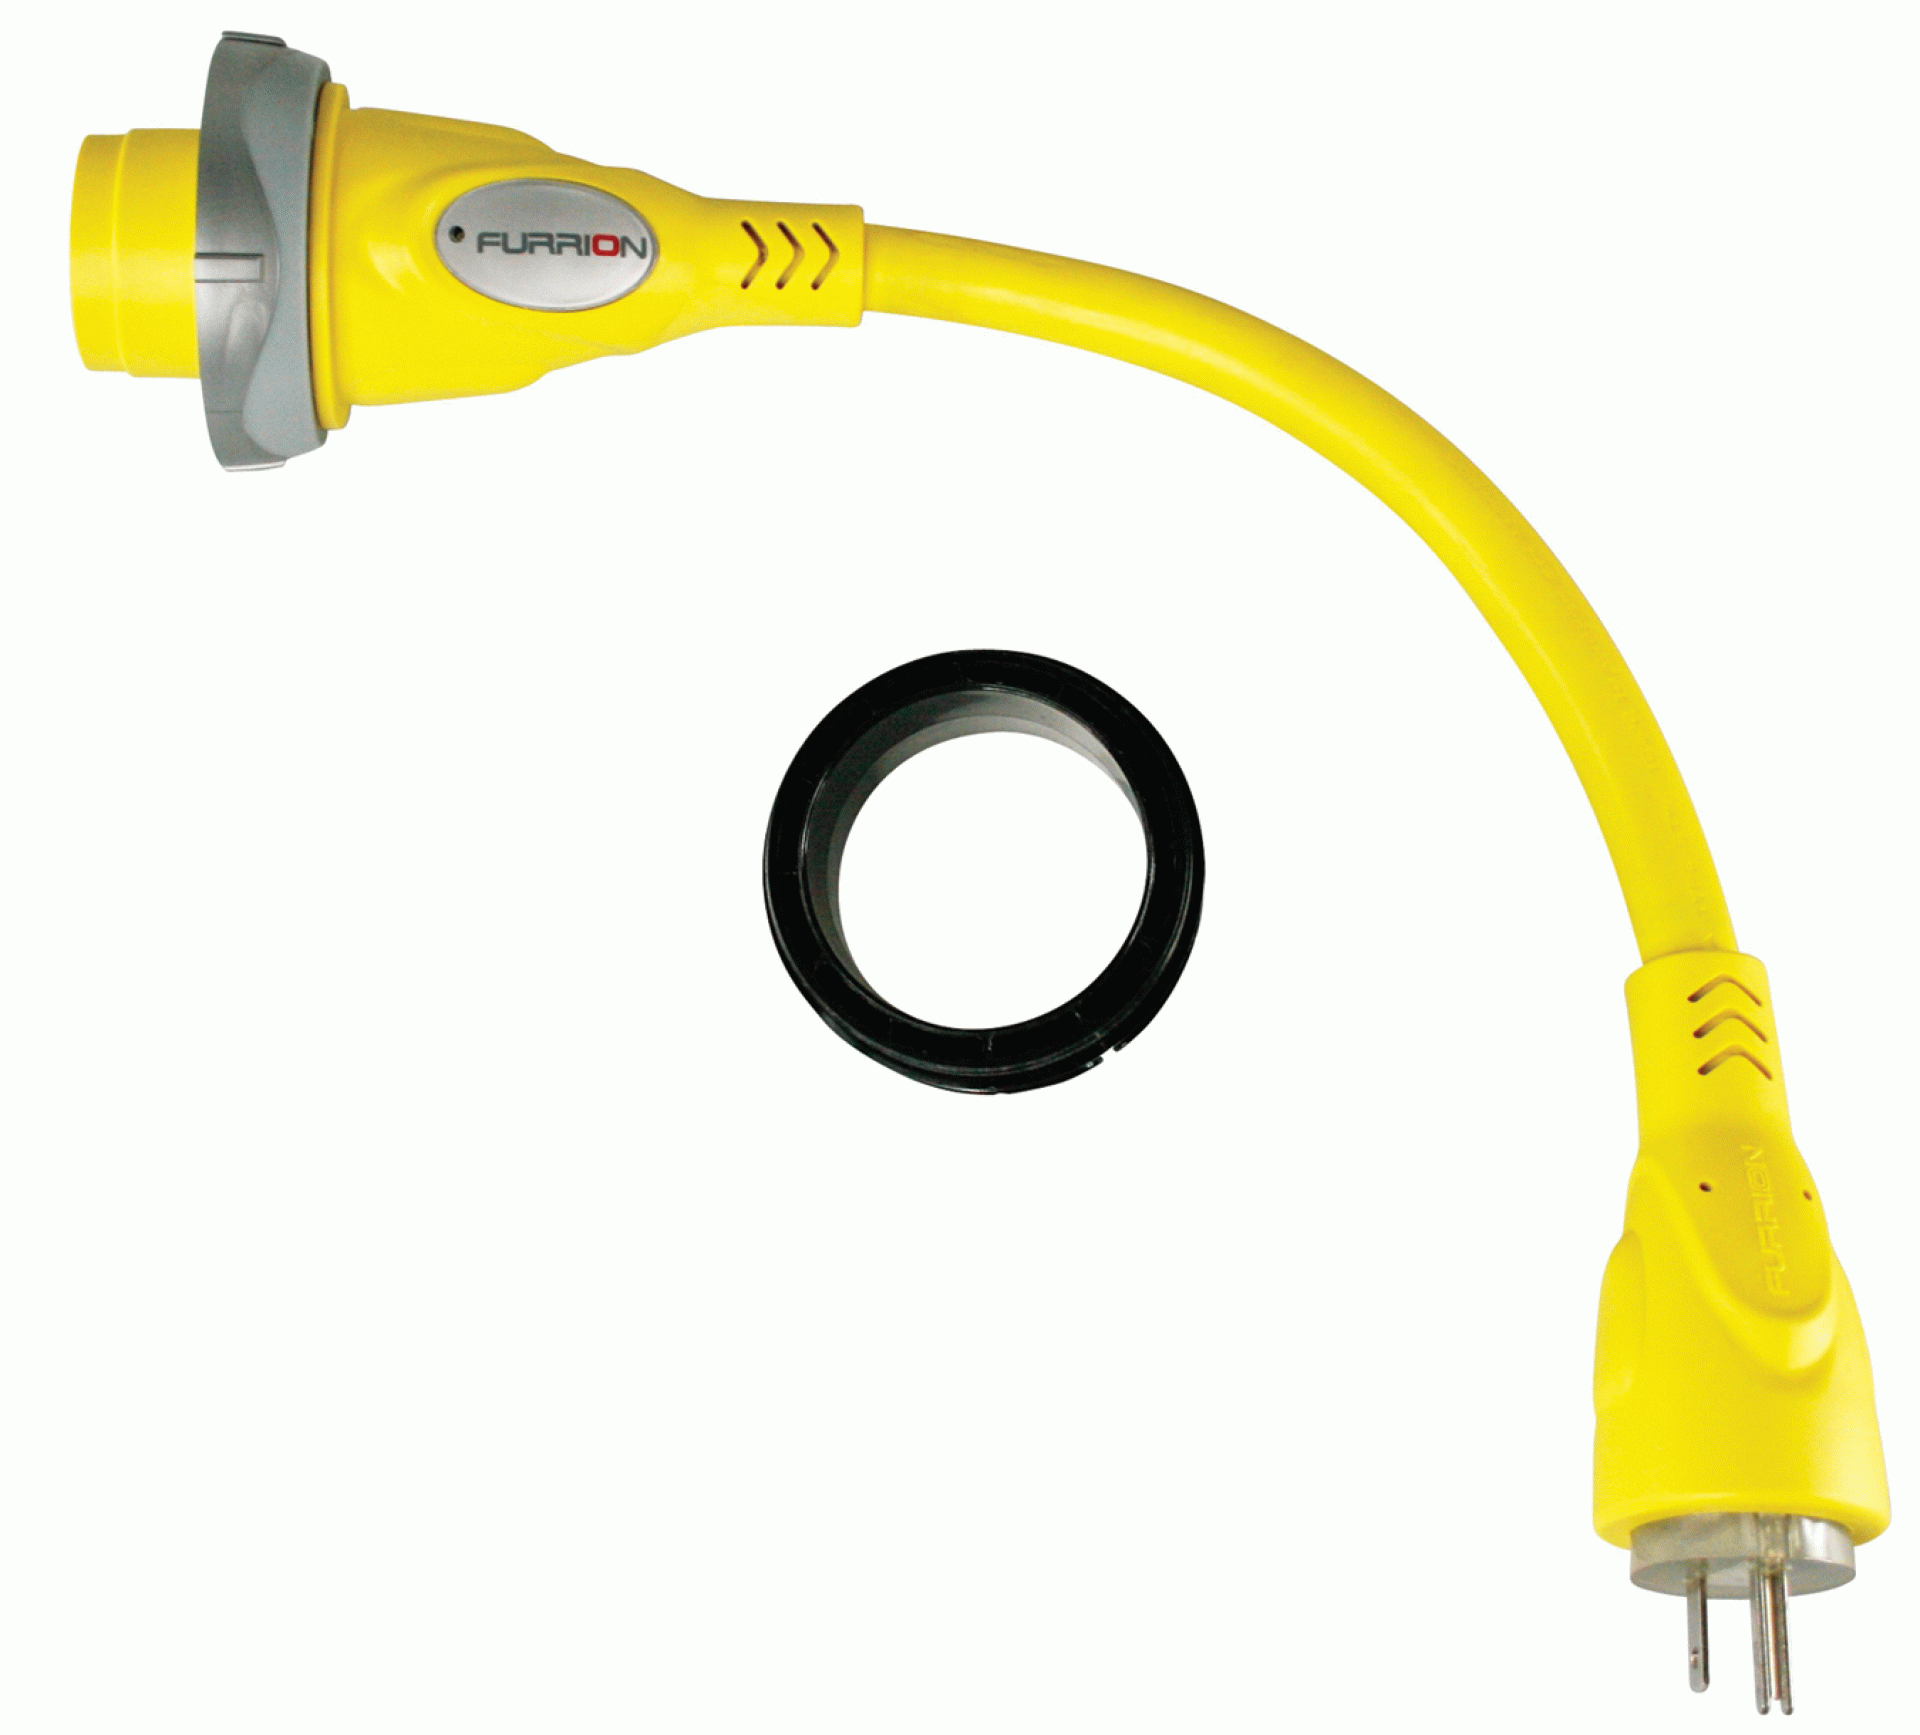 FURRION LLC | 2021123905 | Pigtail Adapter 30 Amp Female - 15 Amp Male - Yellow FP3015-SY